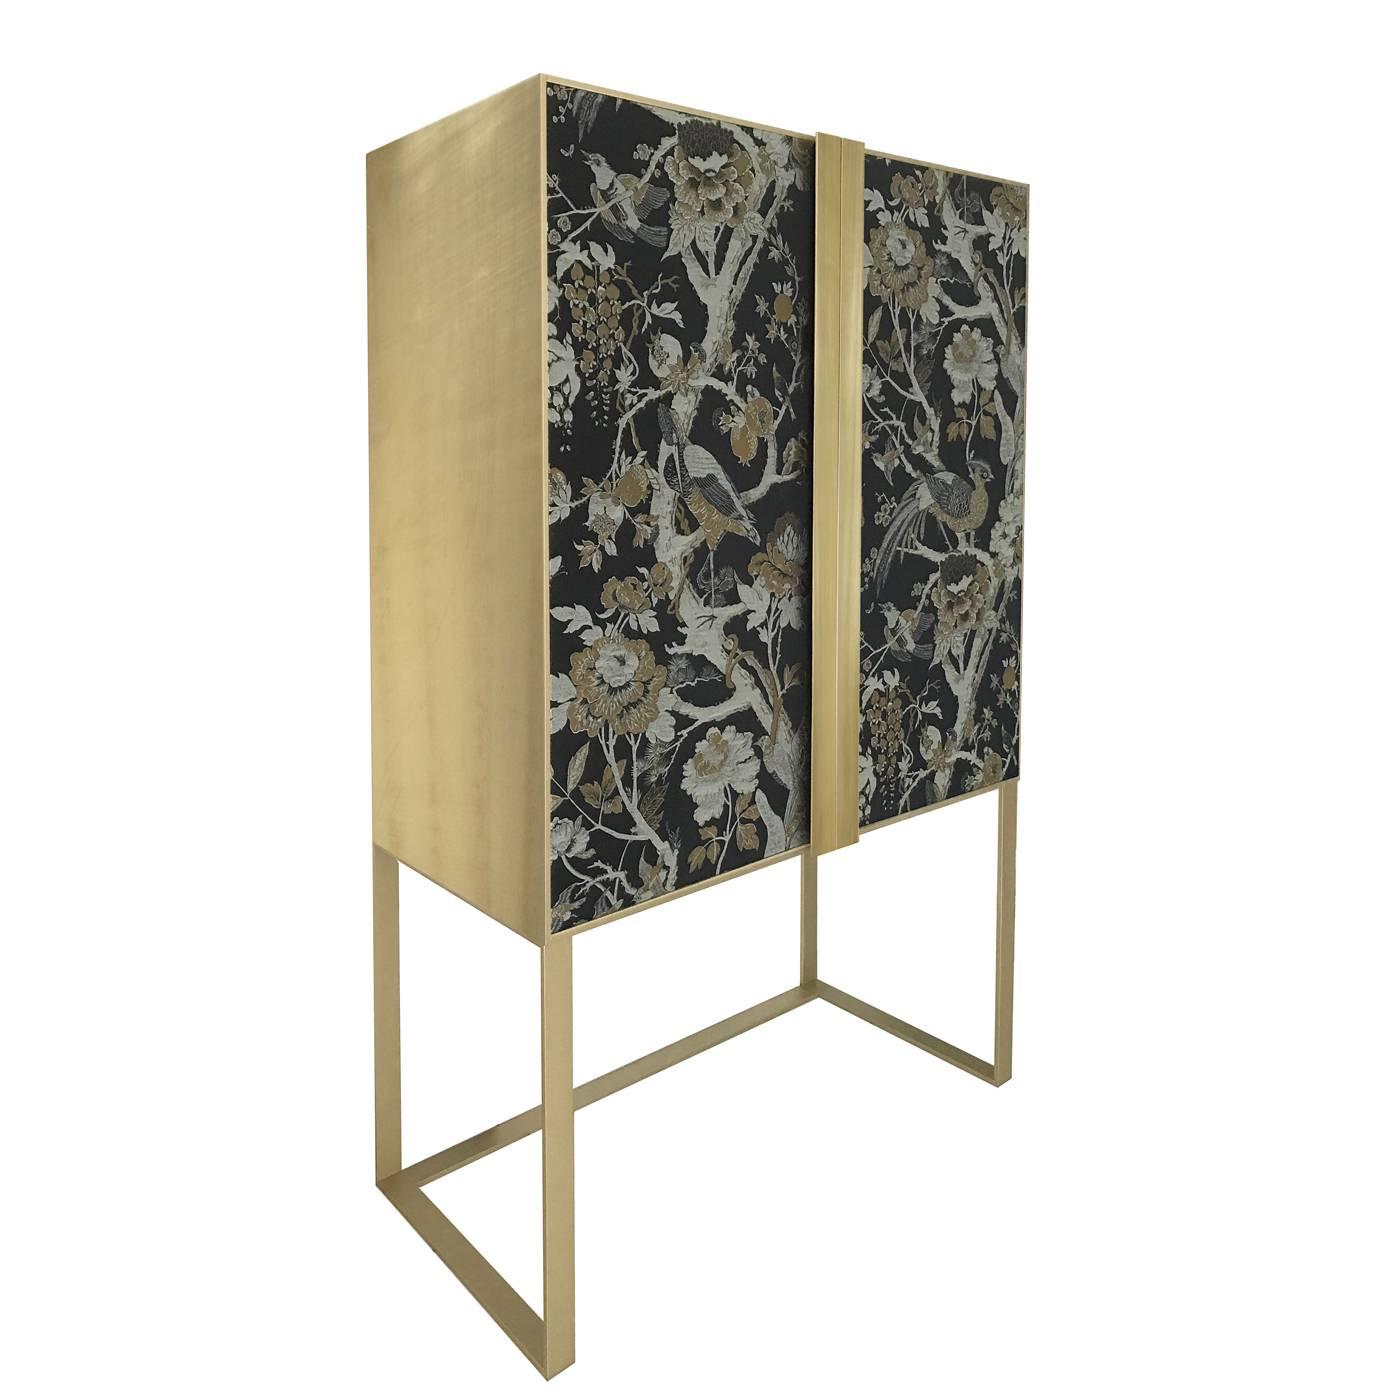 This magnificent cabinet was created to contain beverages, glasses, and table linens and it will enrich any dining room, thanks to its exquisite craftsmanship and the elegance of its contemporary design. Entirely made with artisanal methods, its